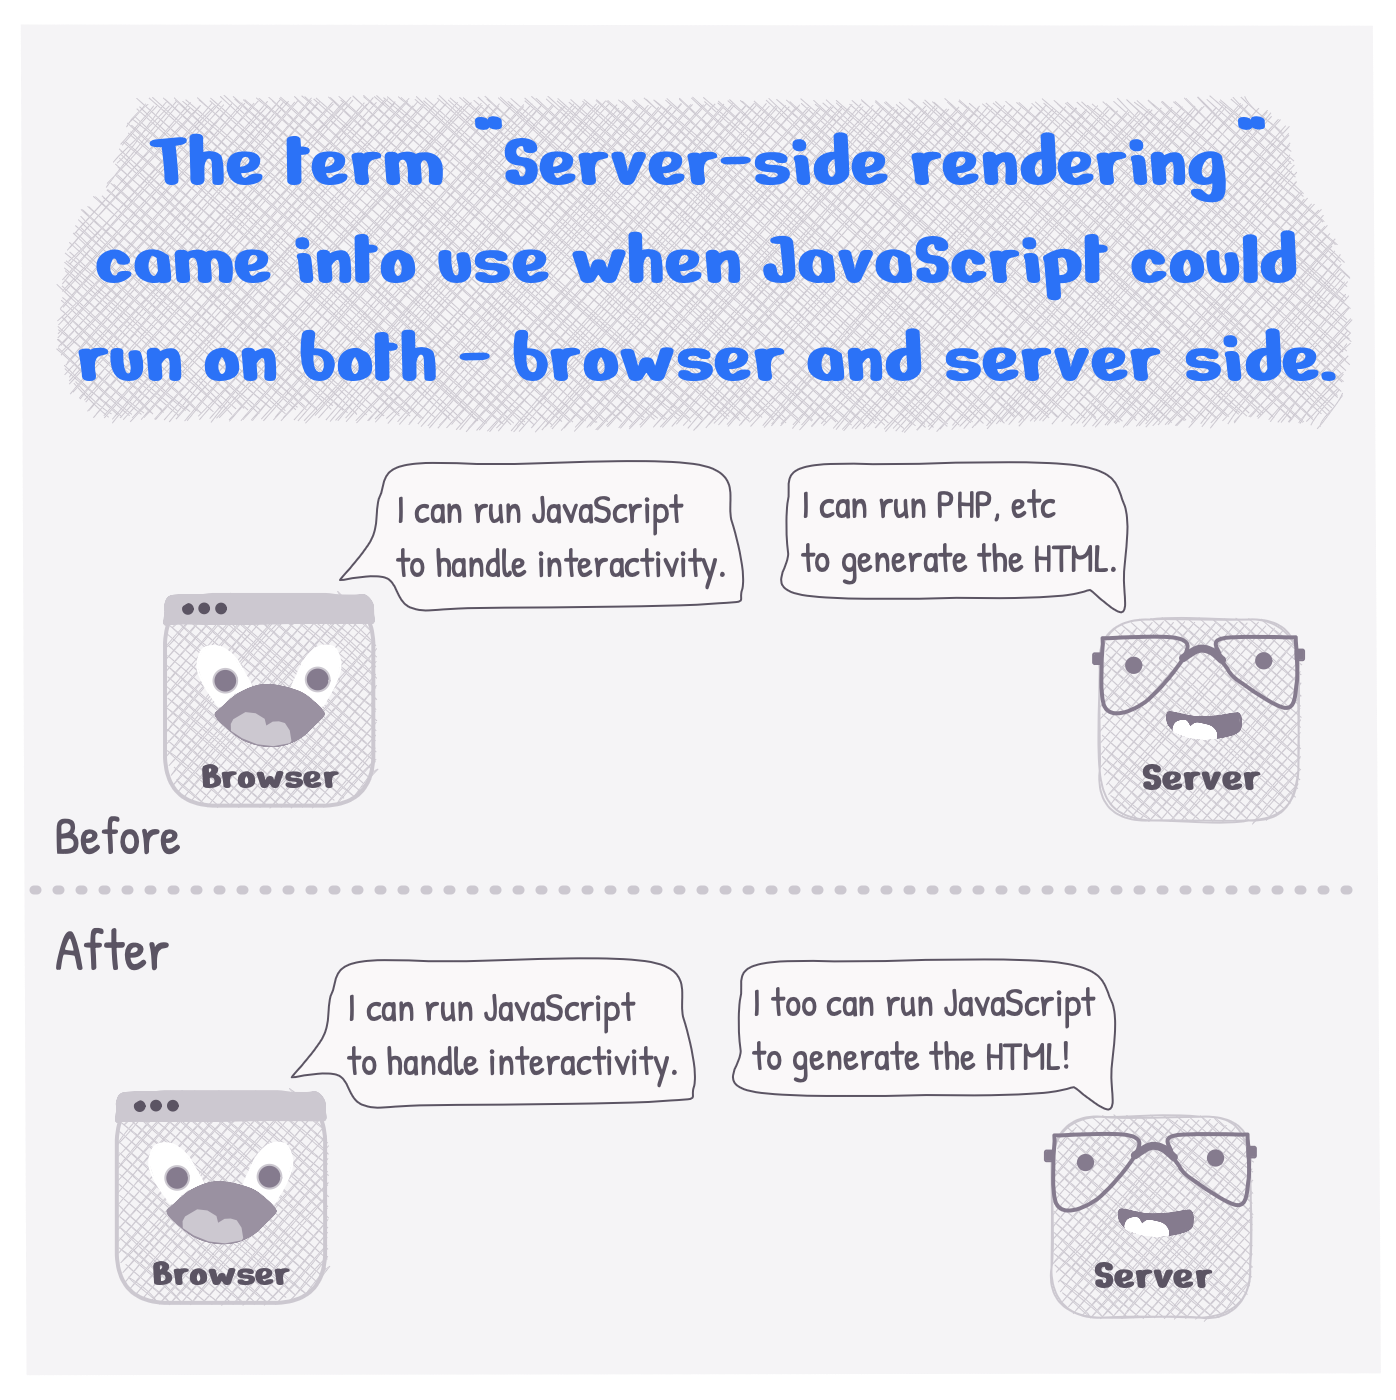 How is Server-side rendering with JavaScript different? - I